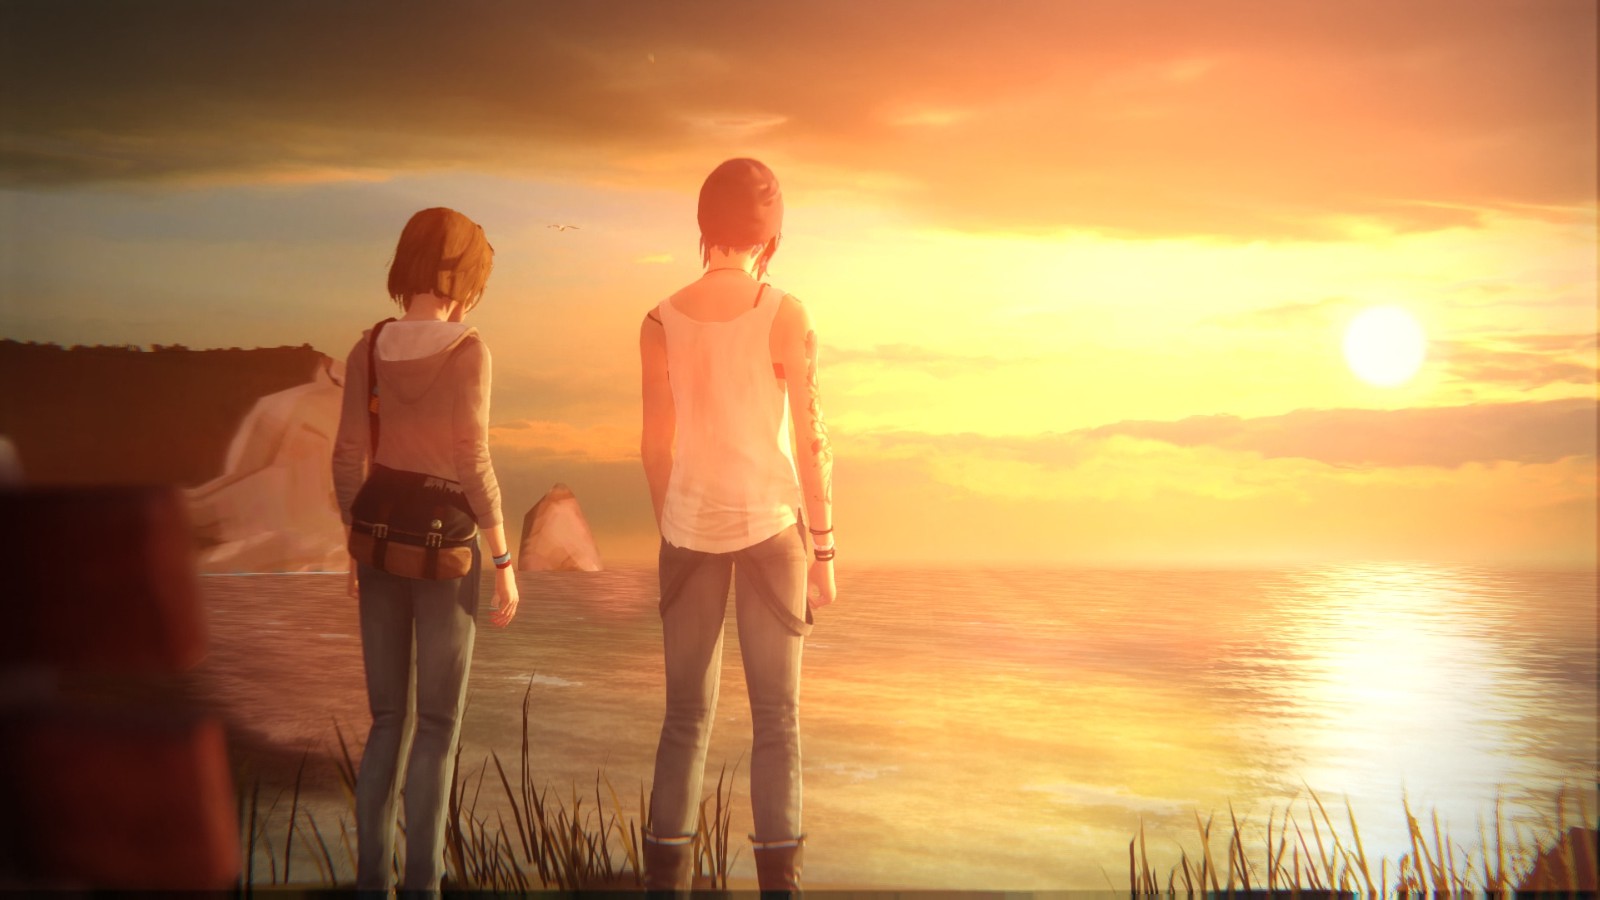 life is strange arcadia bay collection download free